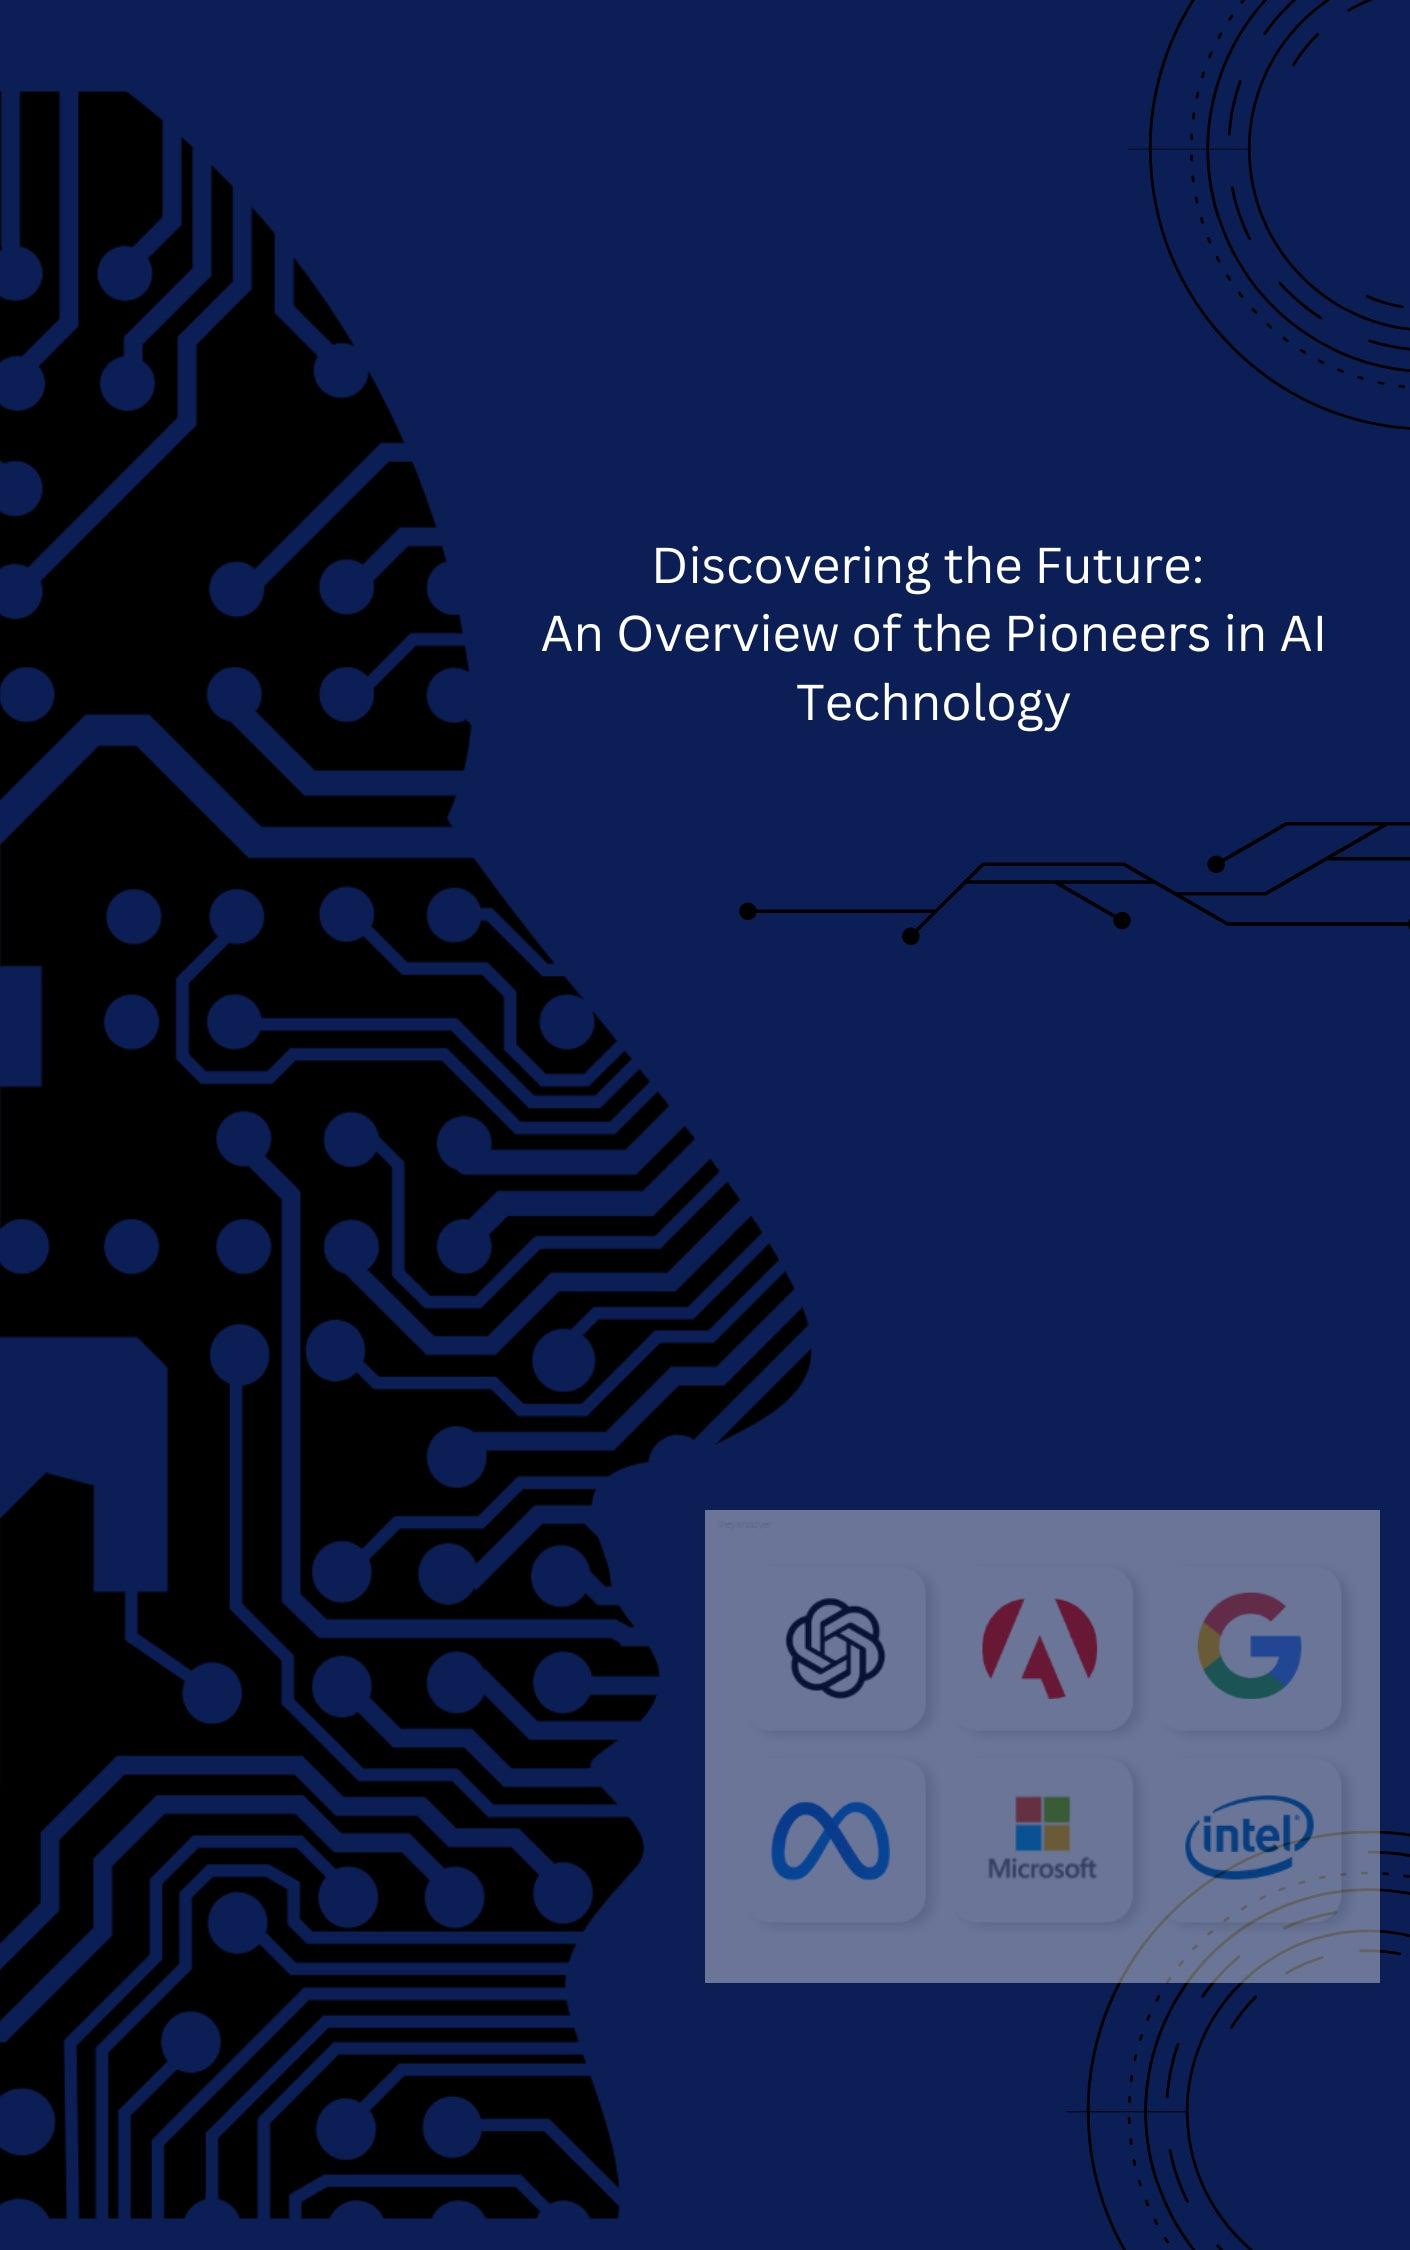 Discovering the Future: An Overview of the Pioneers in AI Technology